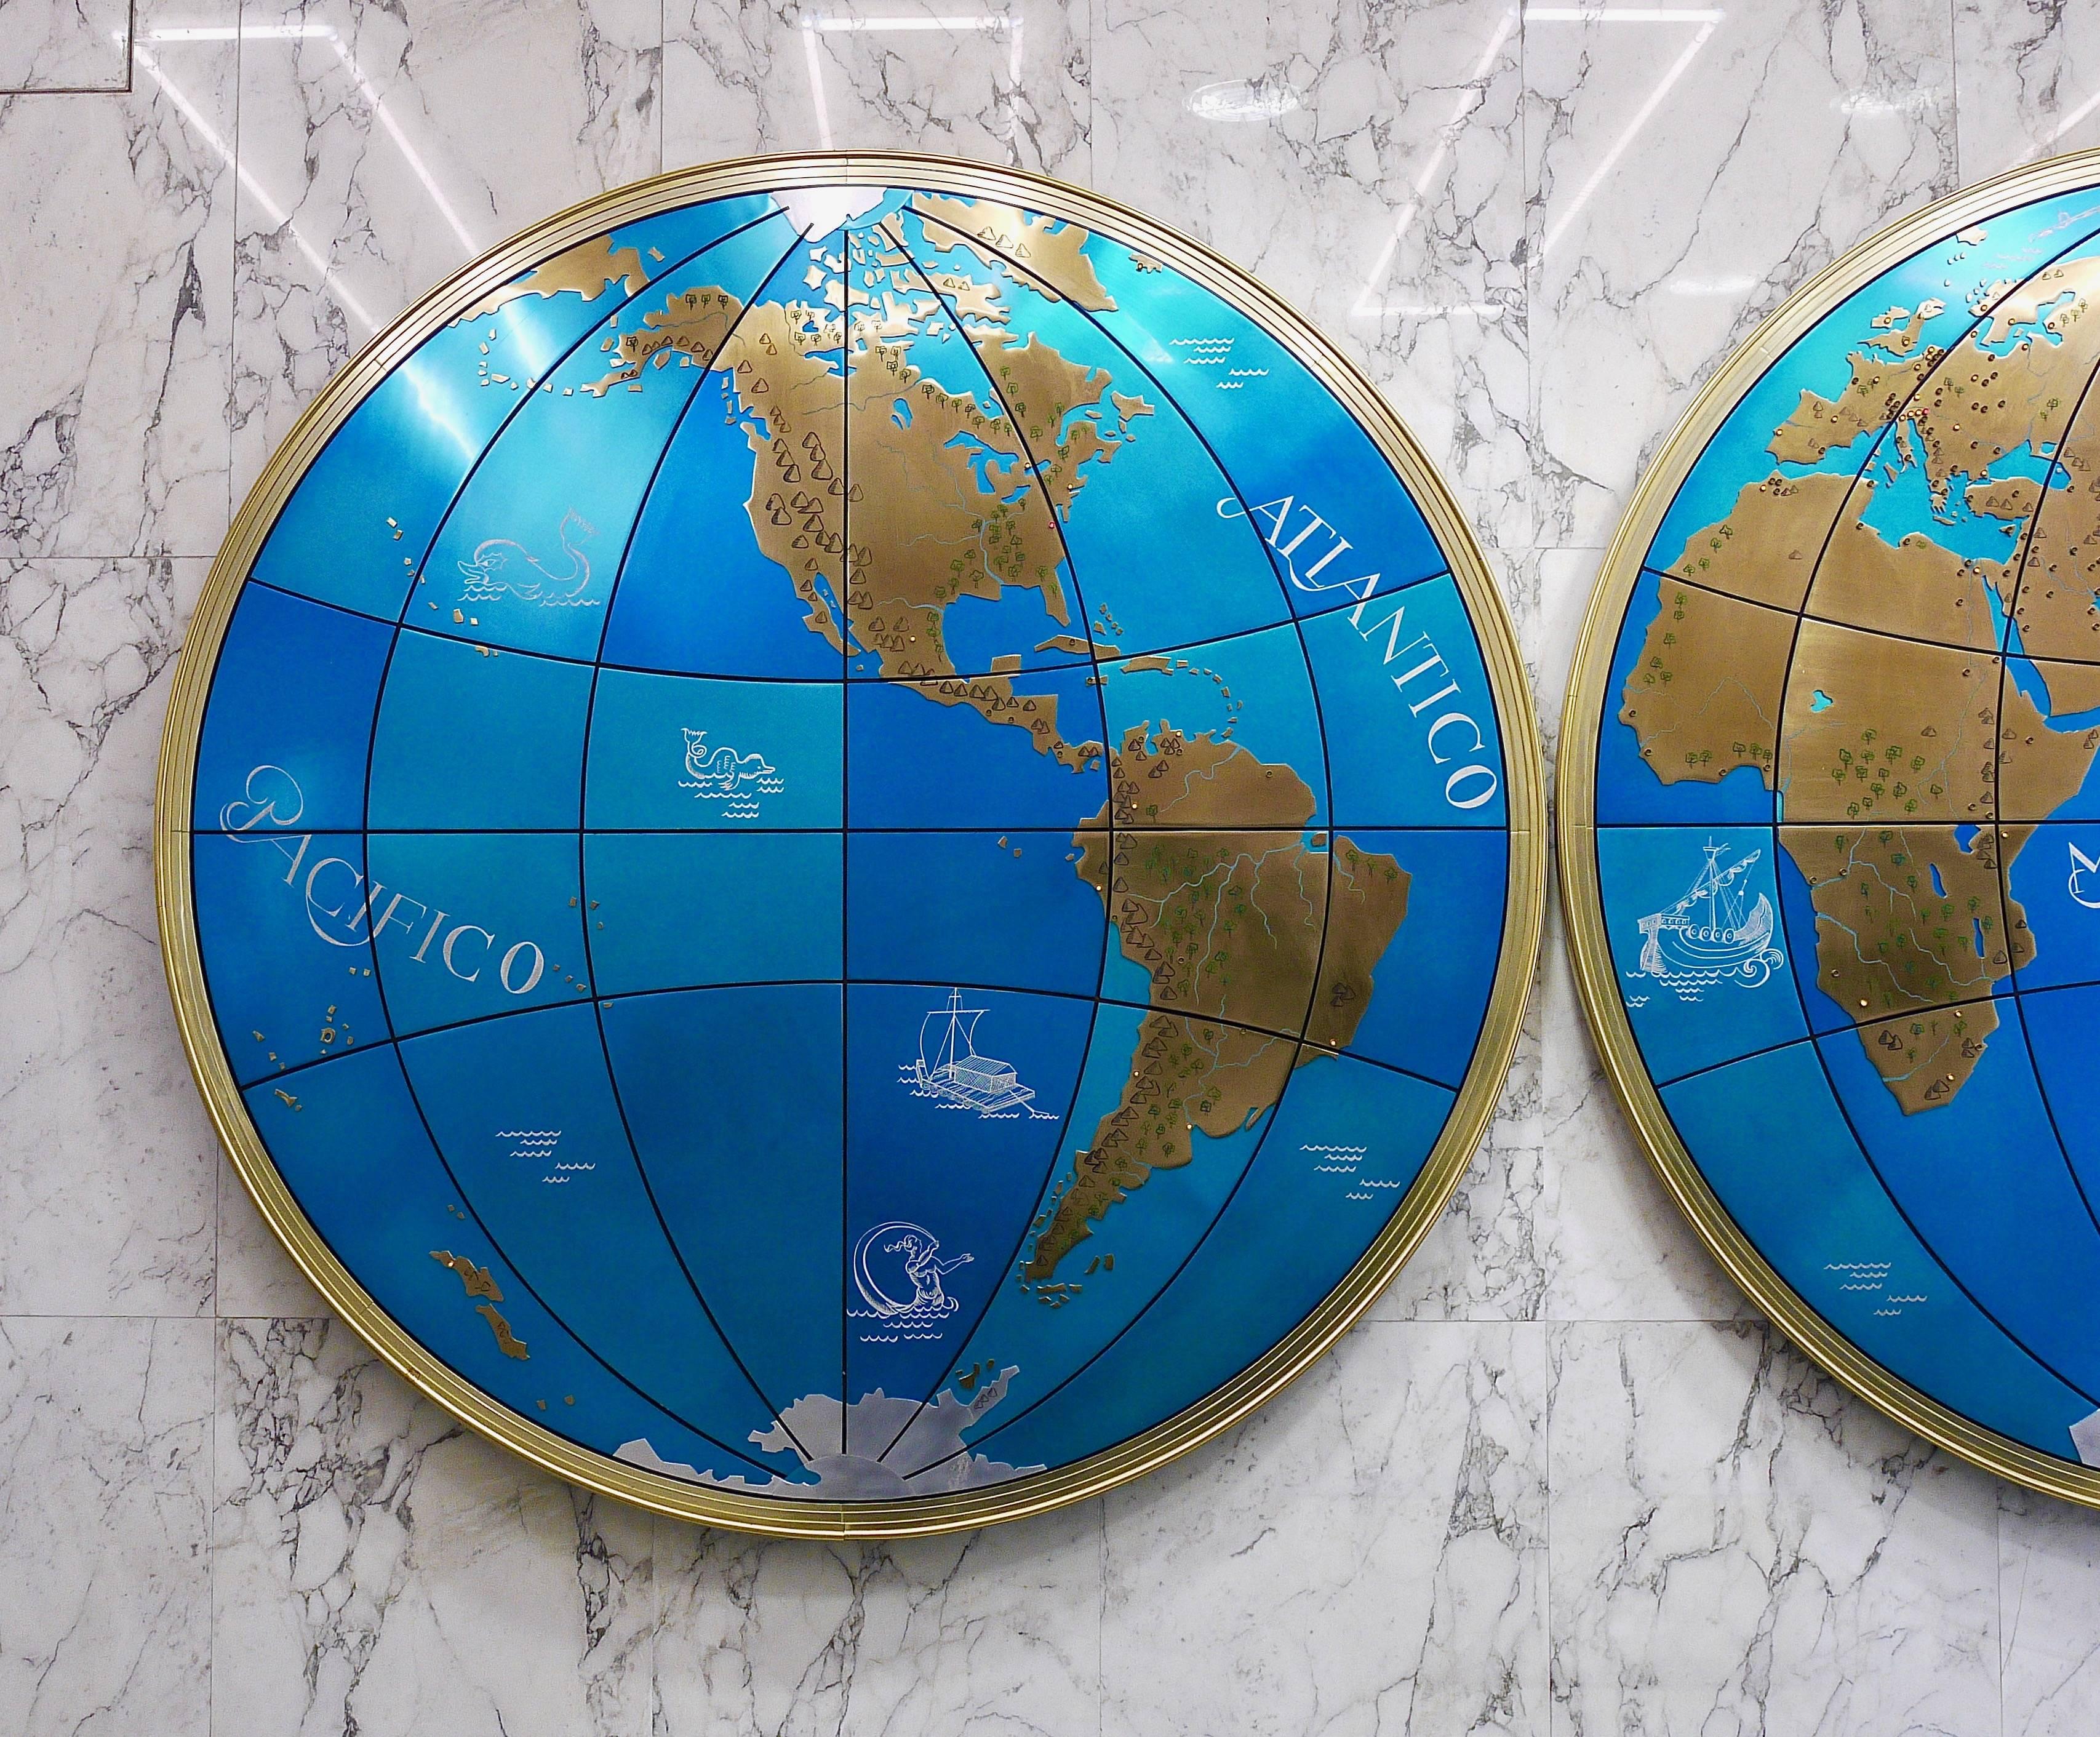 We proudly offer this outstanding pair of very large wall-mounted modernist globes / world maps with an incredible diameter of 95 inches each. Unique one-of-a-kind sculptures depicting the continents of the earth, custom-made in the 1950s for the